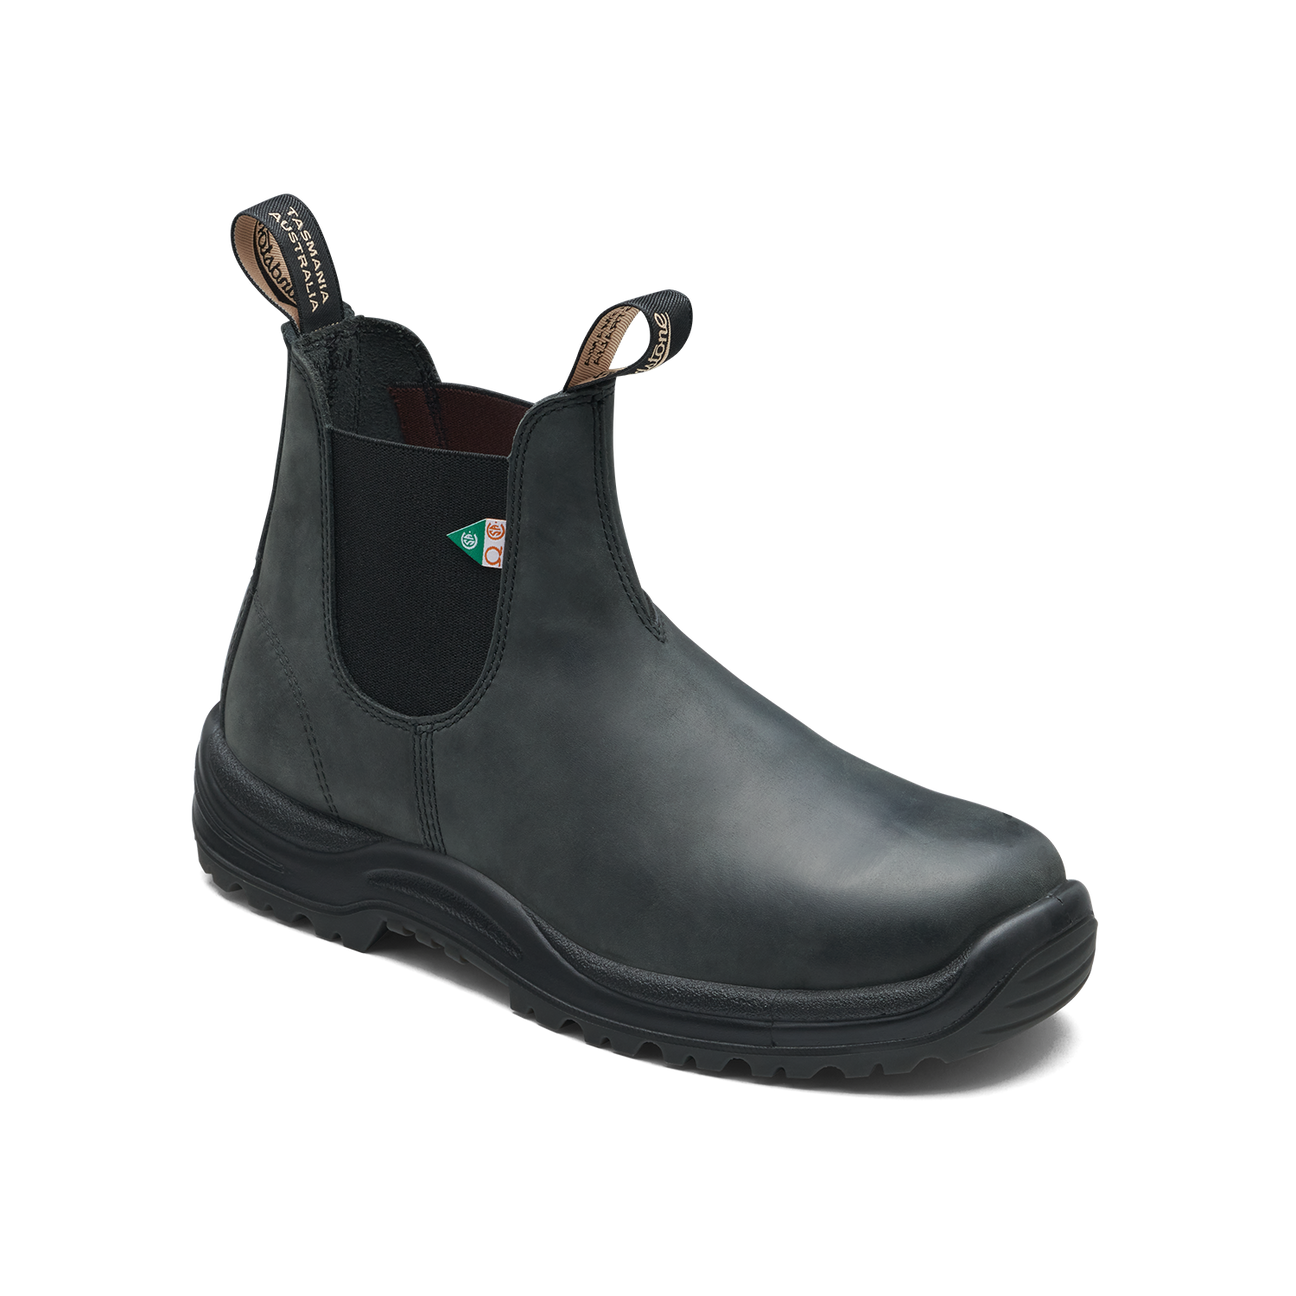 Blundstone 181 Work & Safety Boot - Waxy Rustic Black